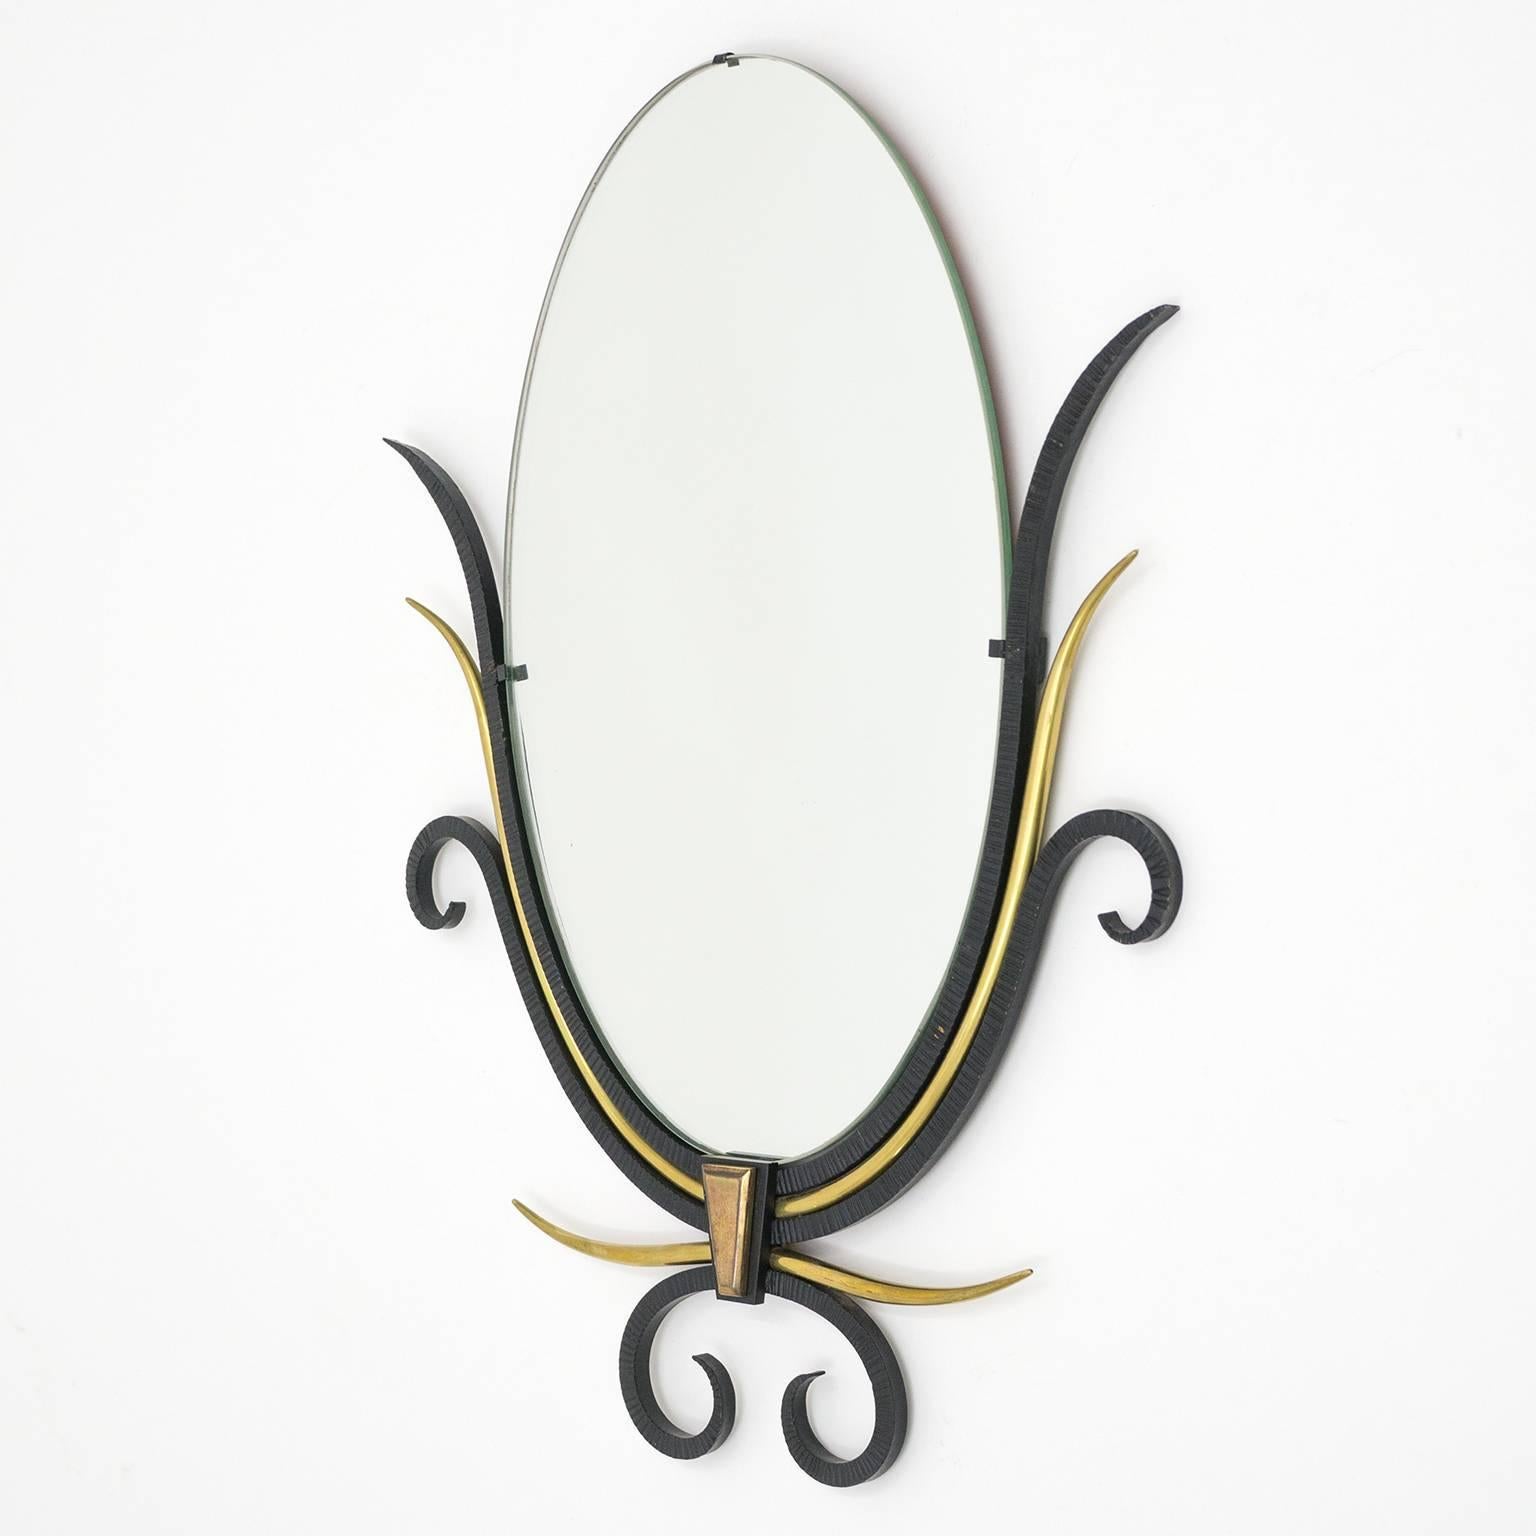 Wonderful lyrical French Art Deco mirrors in the style of Gilbert Poillerat. Very nice combination of blackened wrought iron with smooth brass elements. Good original condition with a light patina to the brass and wrought iron and some age-related